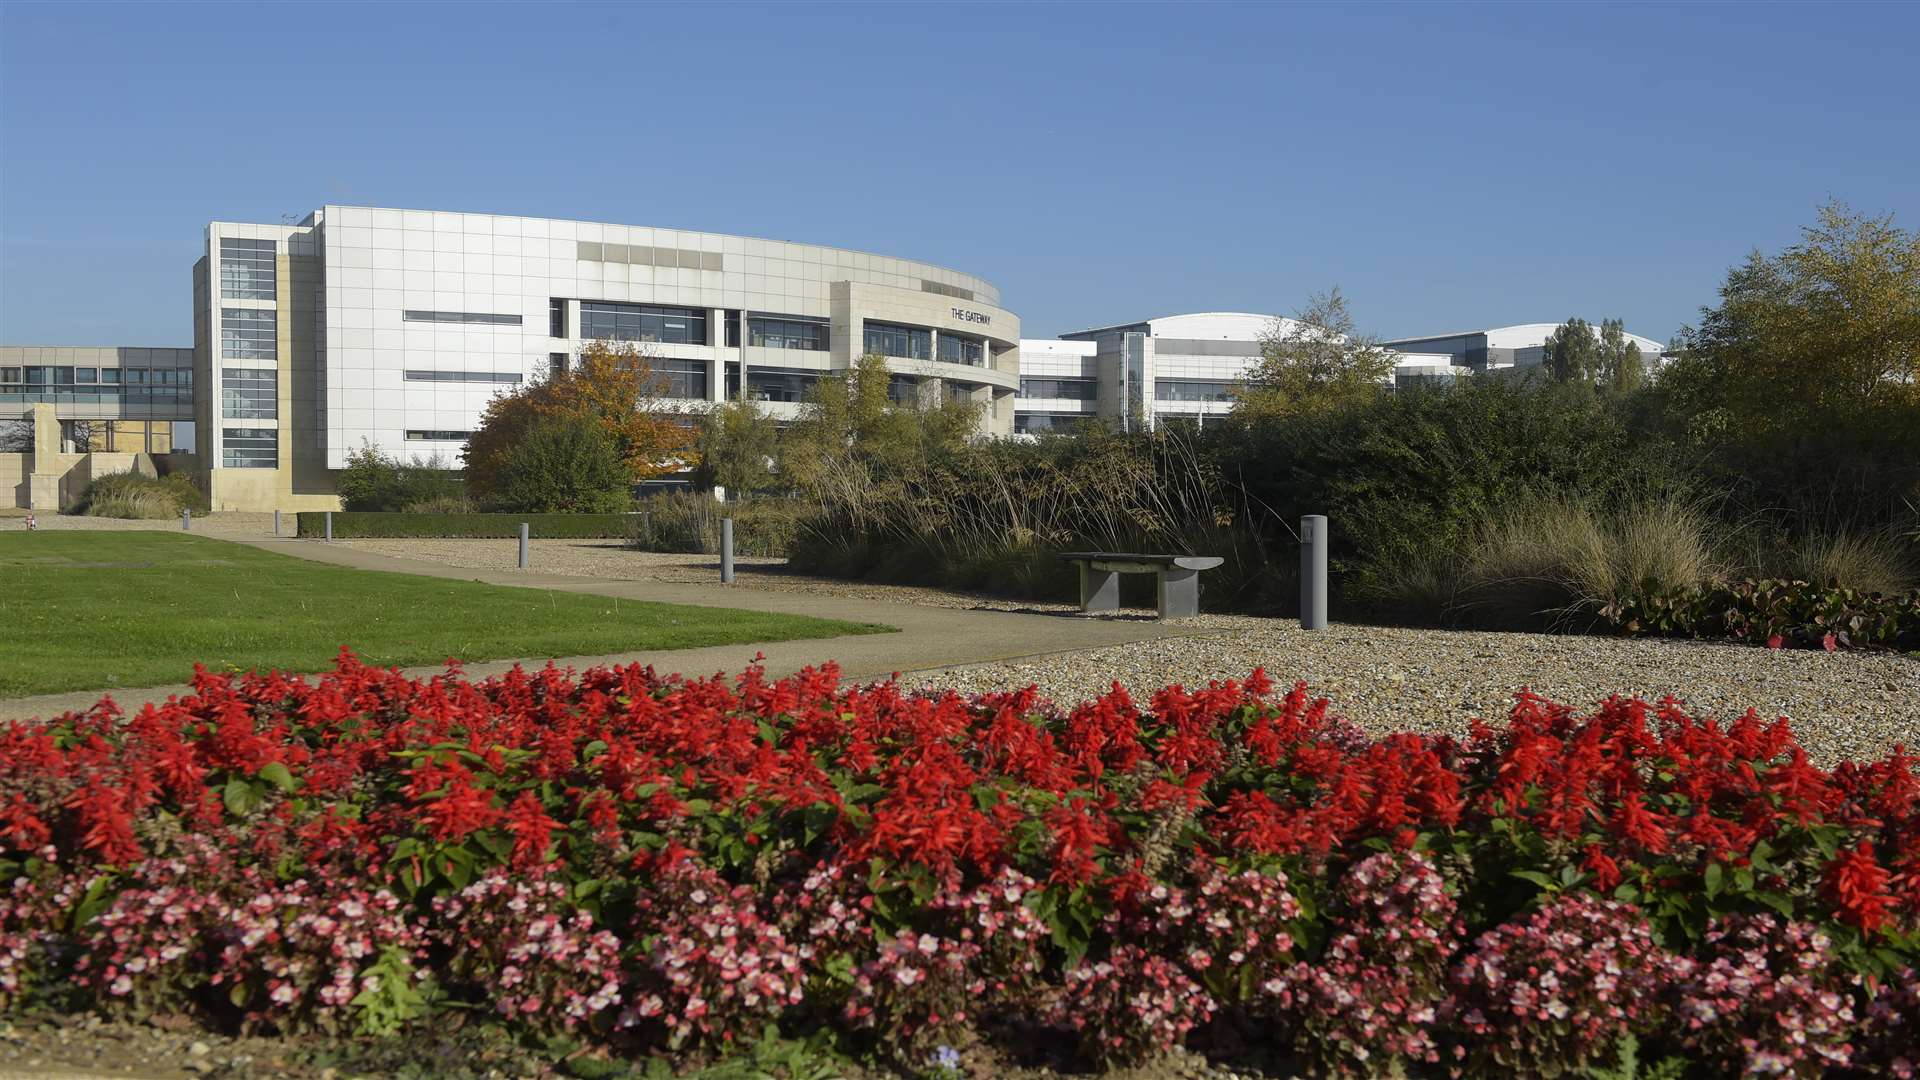 Discovery Park was Pfizer's major research centre in the UK until 2011